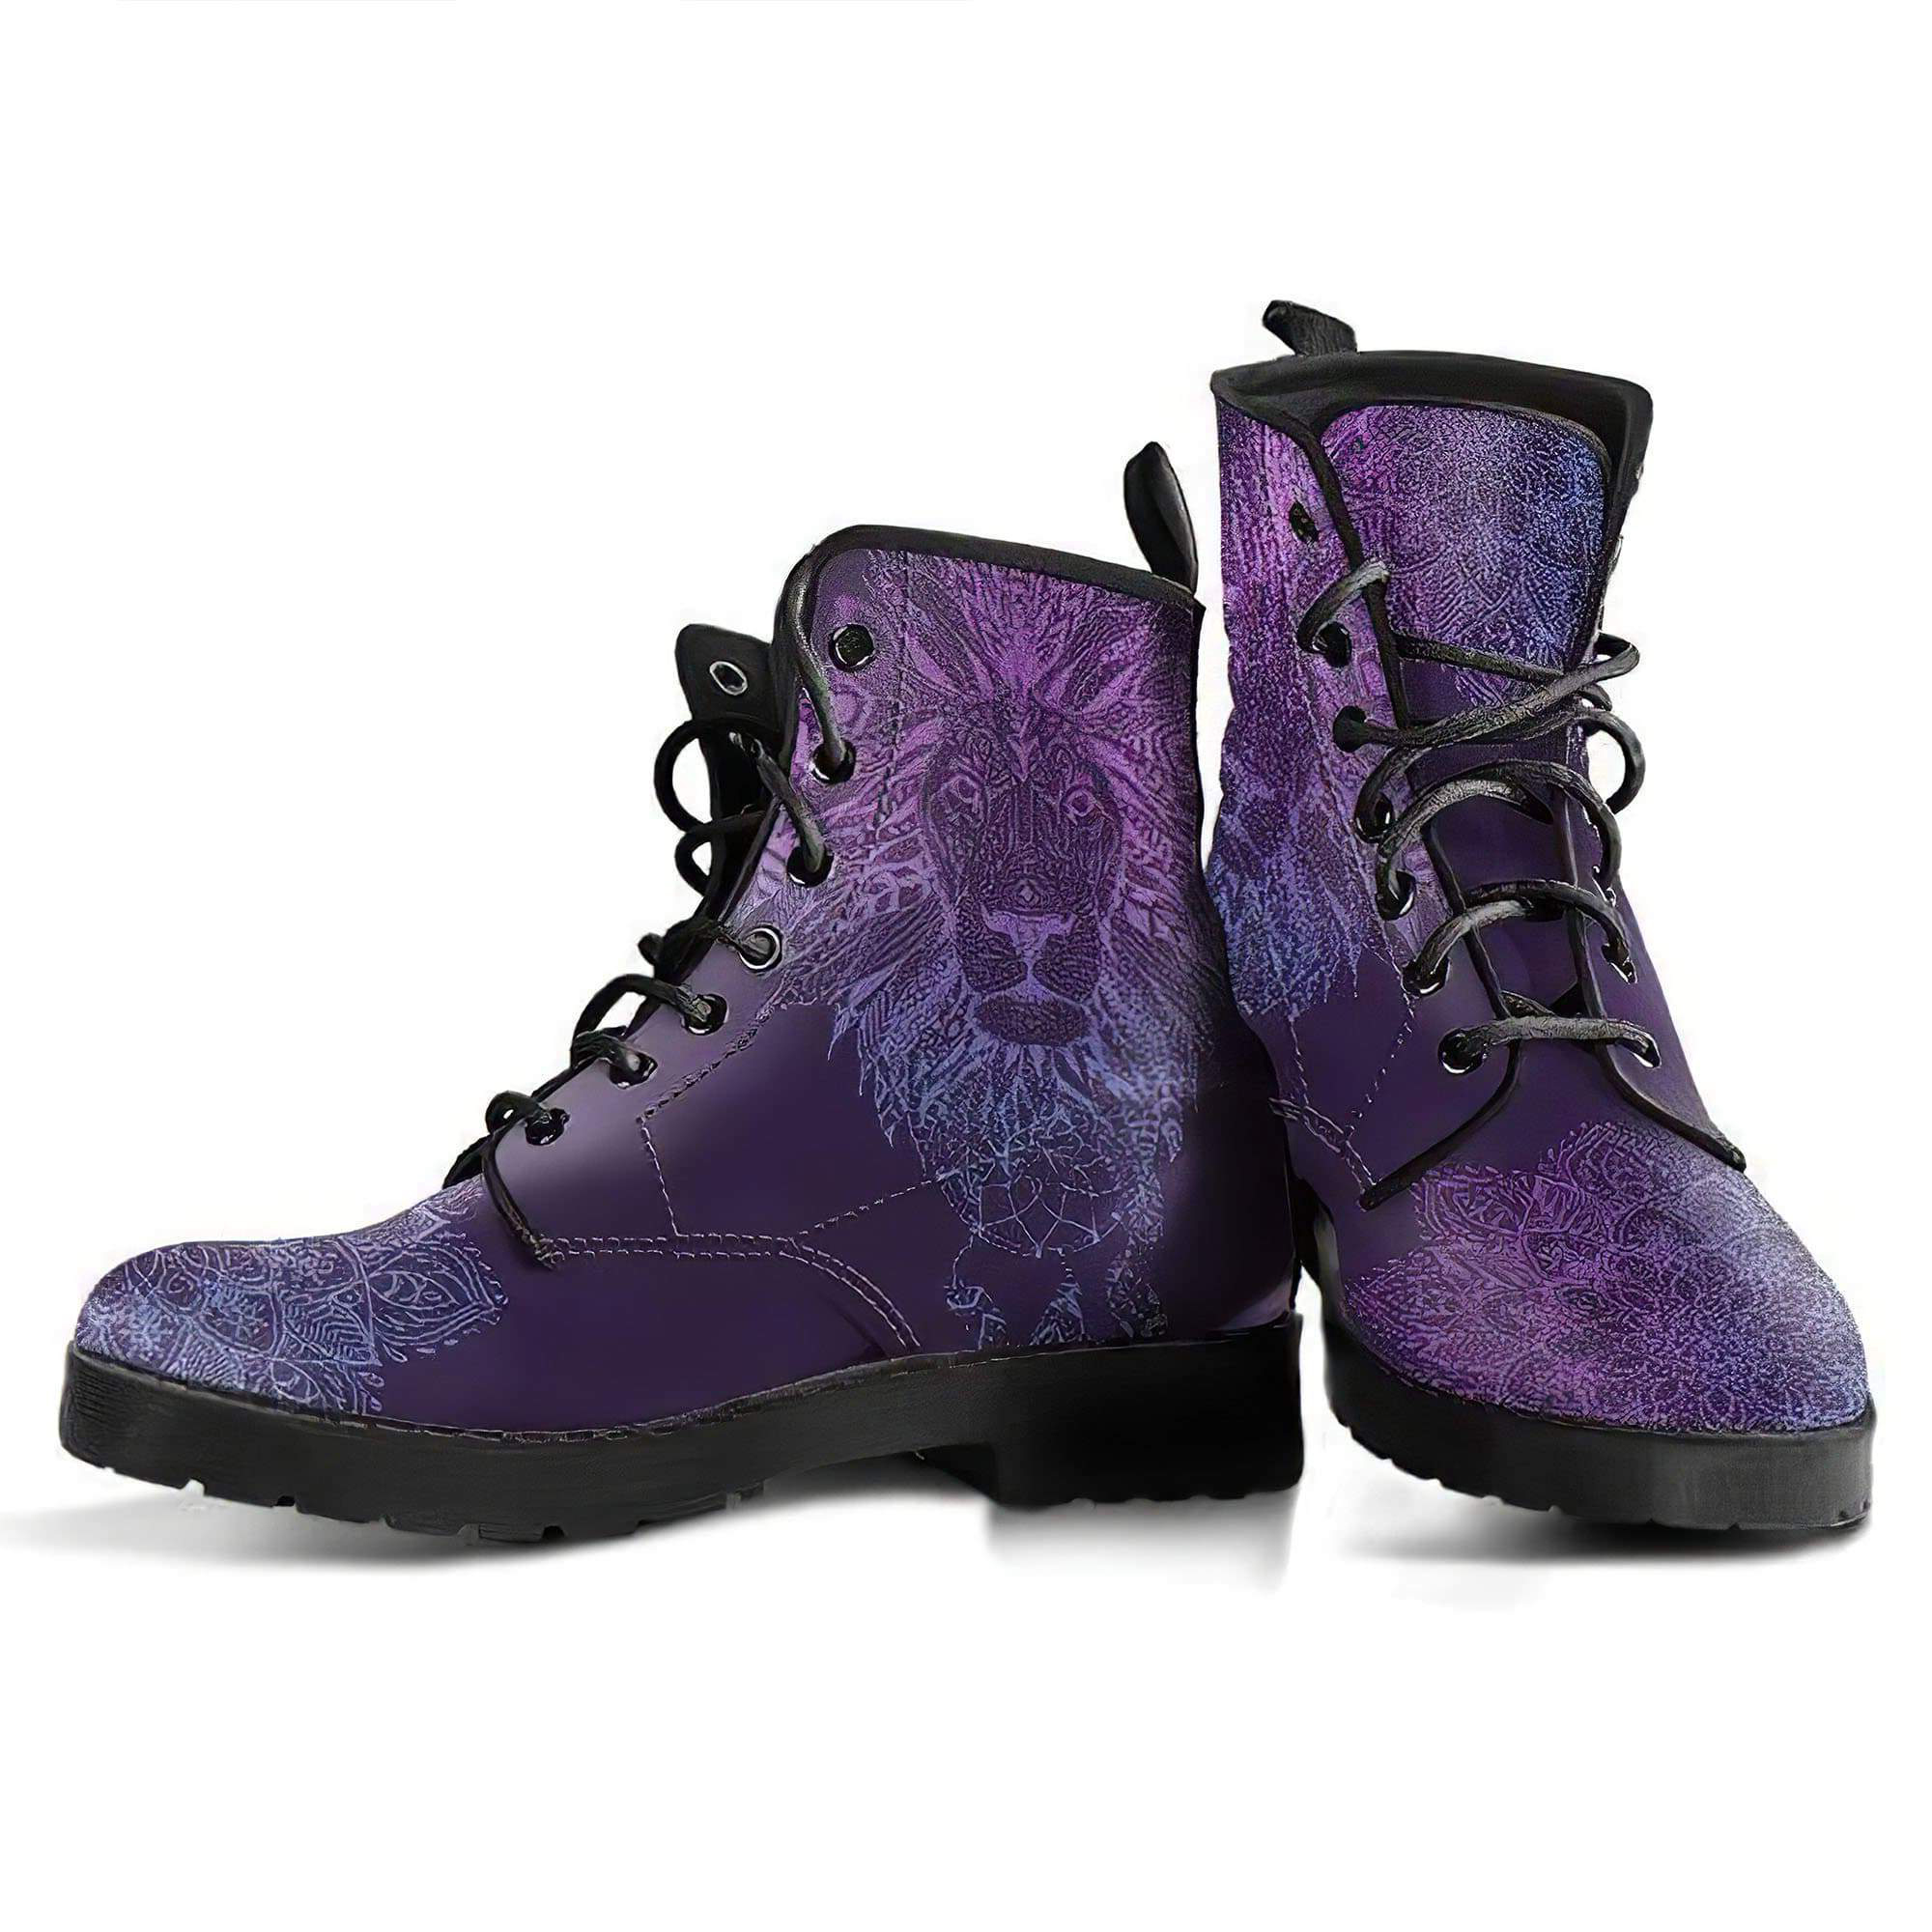 purple-lion-handcrafted-boots-women-s-leather-boots-12051936477245.jpg